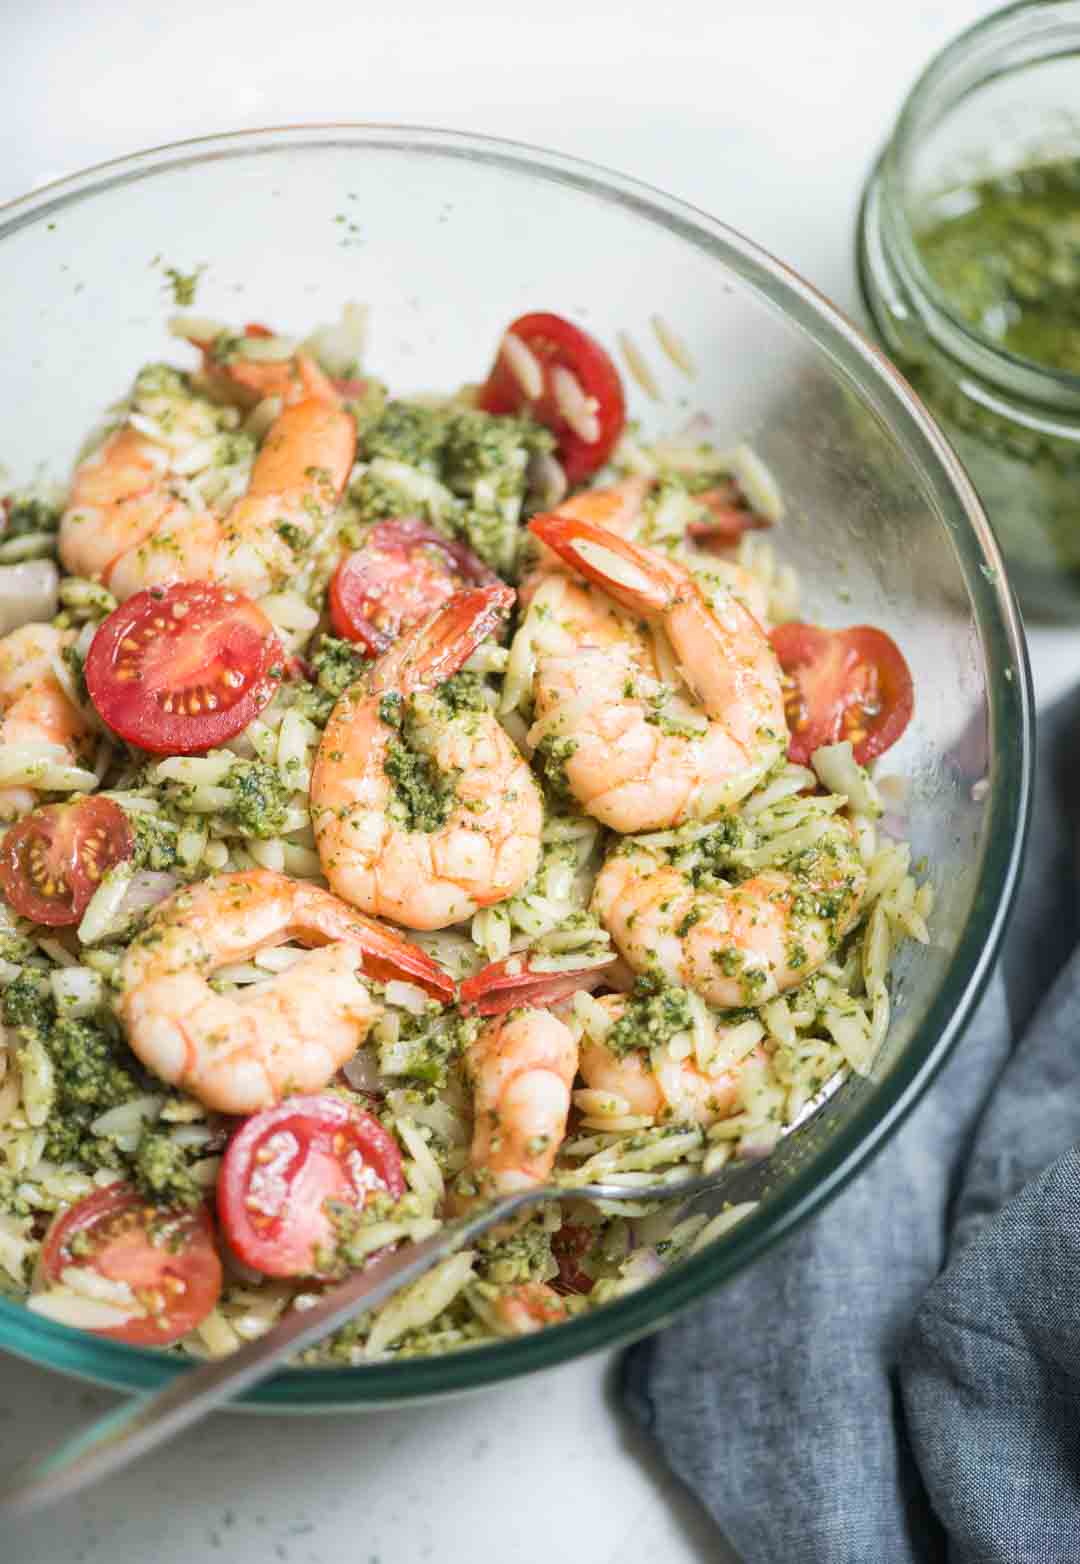 Orzo salad is loaded with Juicy shrimp, cherry tomatoes, onion and everything is tossed in fresh basil pesto. This refreshing salad can be served as a main dish or as a side dish in summer barbeque.